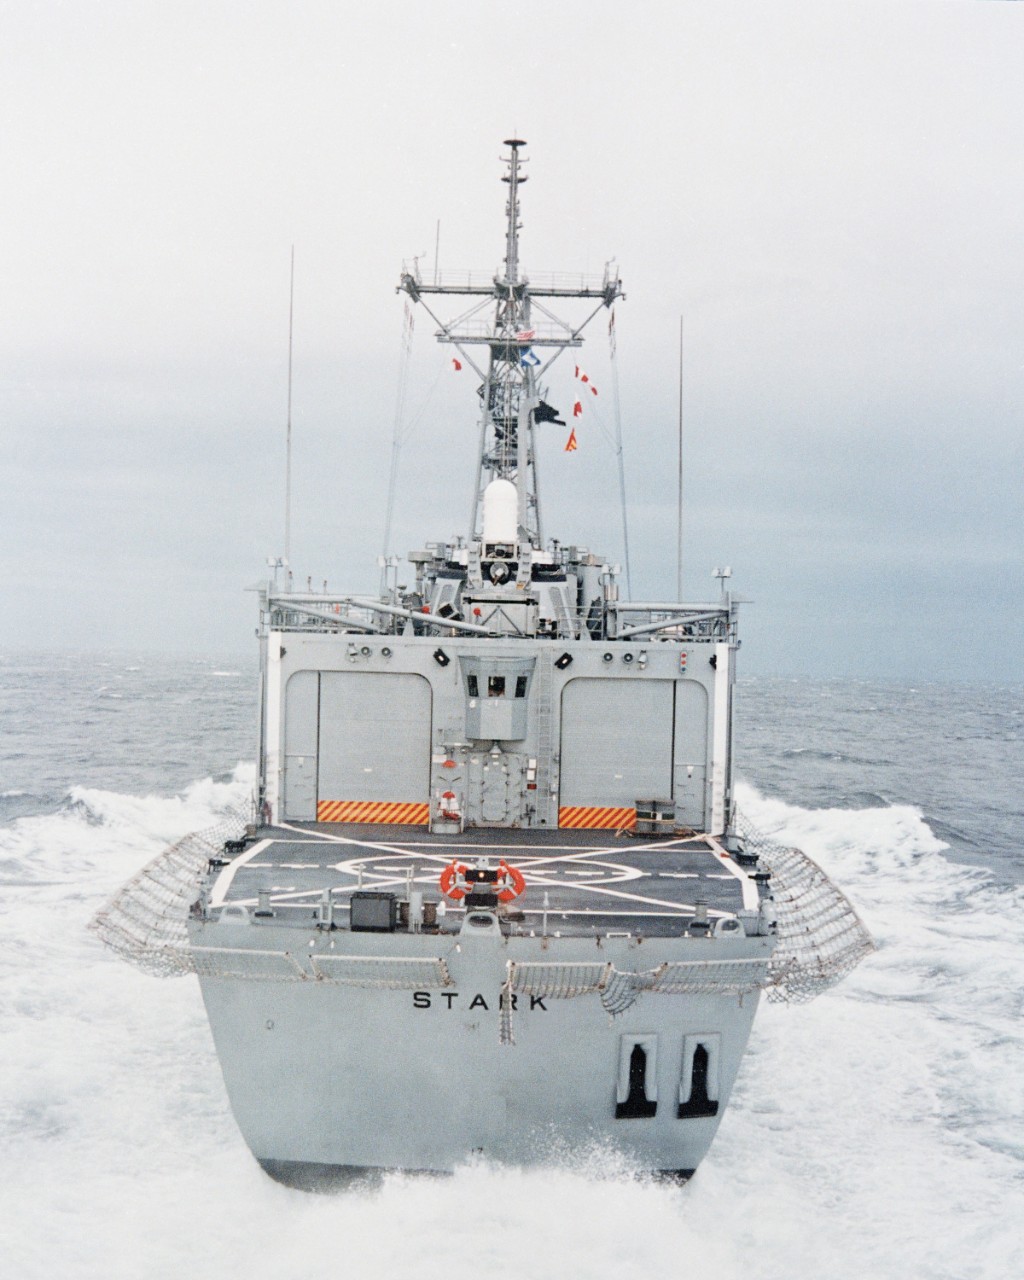 A stern shot of Stark shows the ship churning the water as she makes speed during the trials, 13 July 1982. Note the CIWS mount, and the hangars and flight deck. (Todd Pacific Shipyards Corp., Department of Defense Photograph DN-SC-83-11742, Still Pictures Branch, National Archives and Records Administration II, College Park, Md., Photograph 6369663)